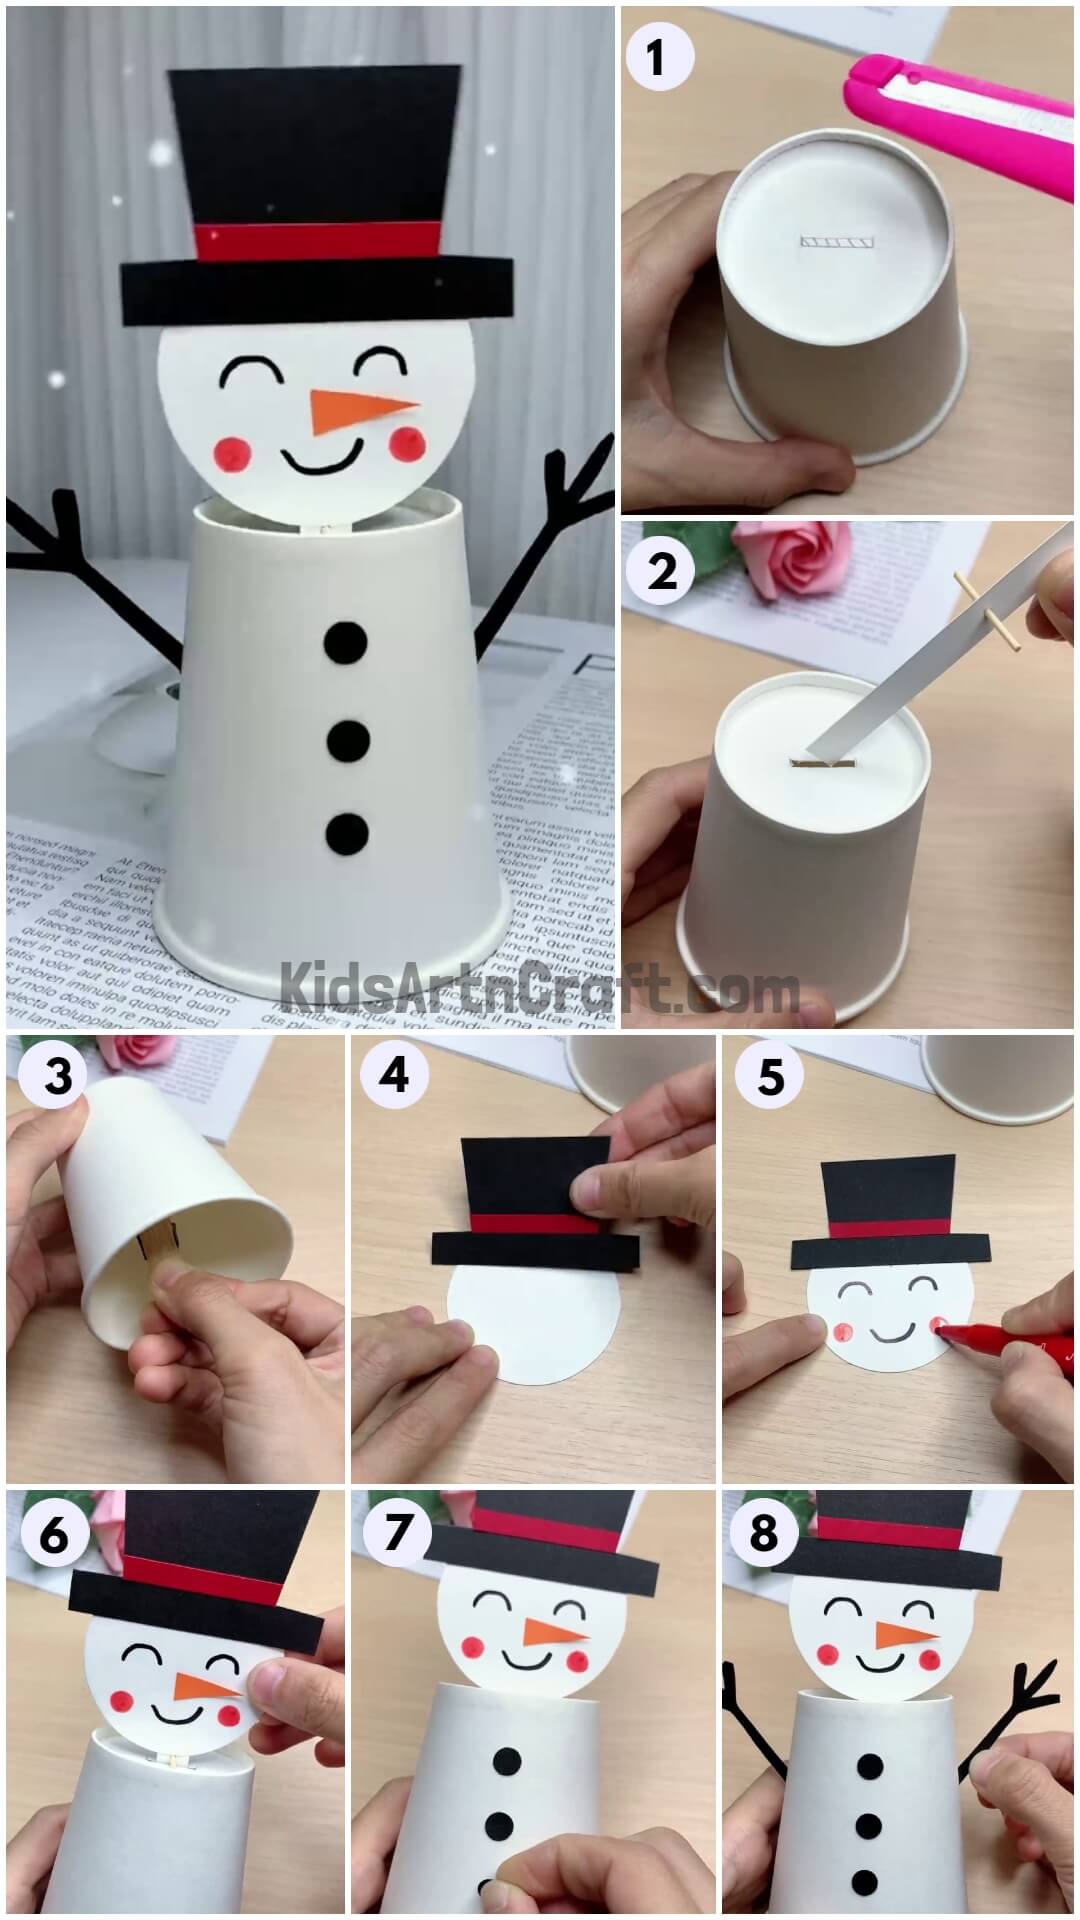 DIY Snowman Paper Cup Craft Tutorial For Kids